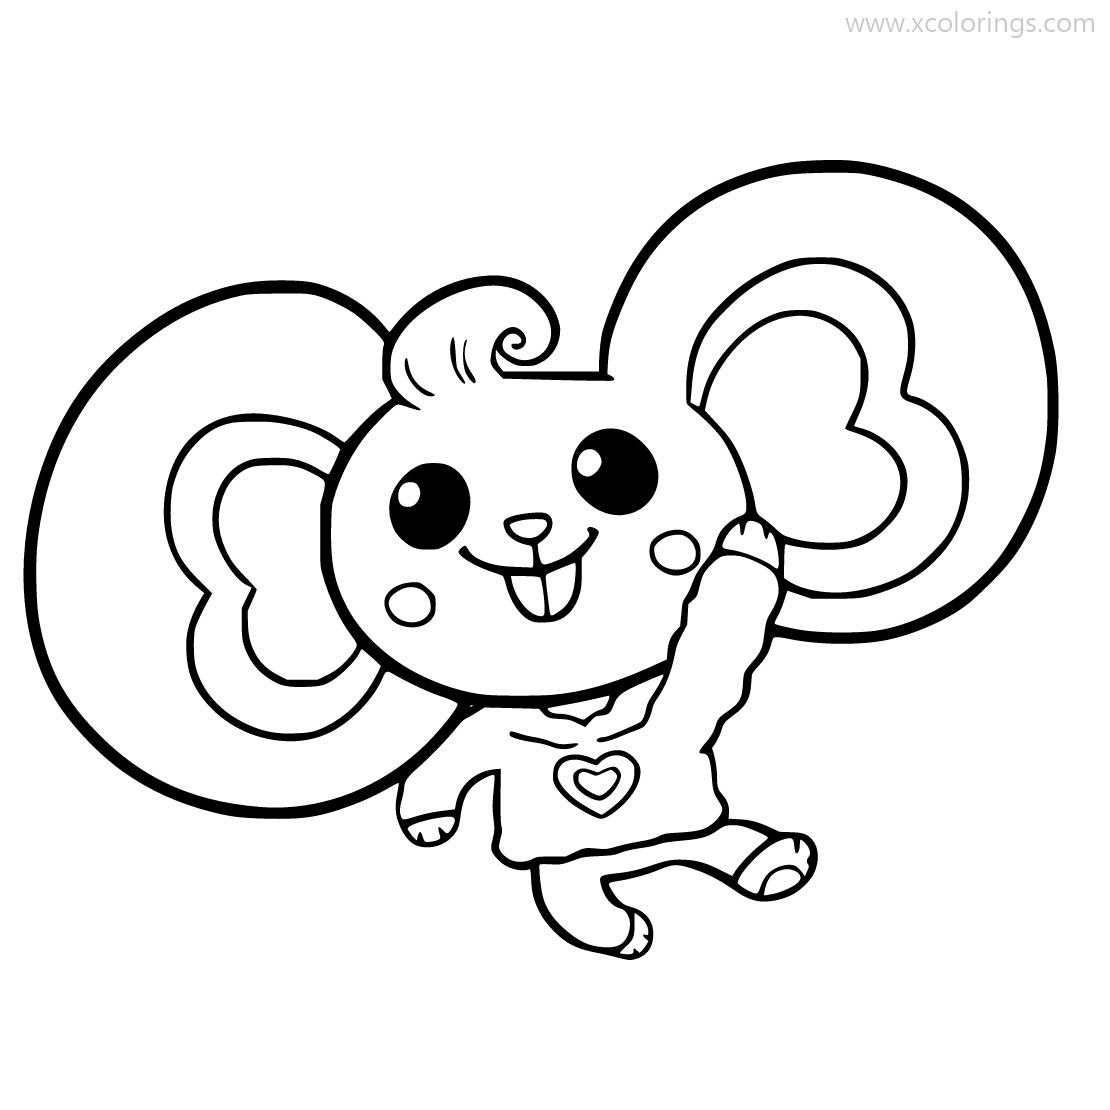 Free Chip and Potato Coloring Pages Potato Mouse printable